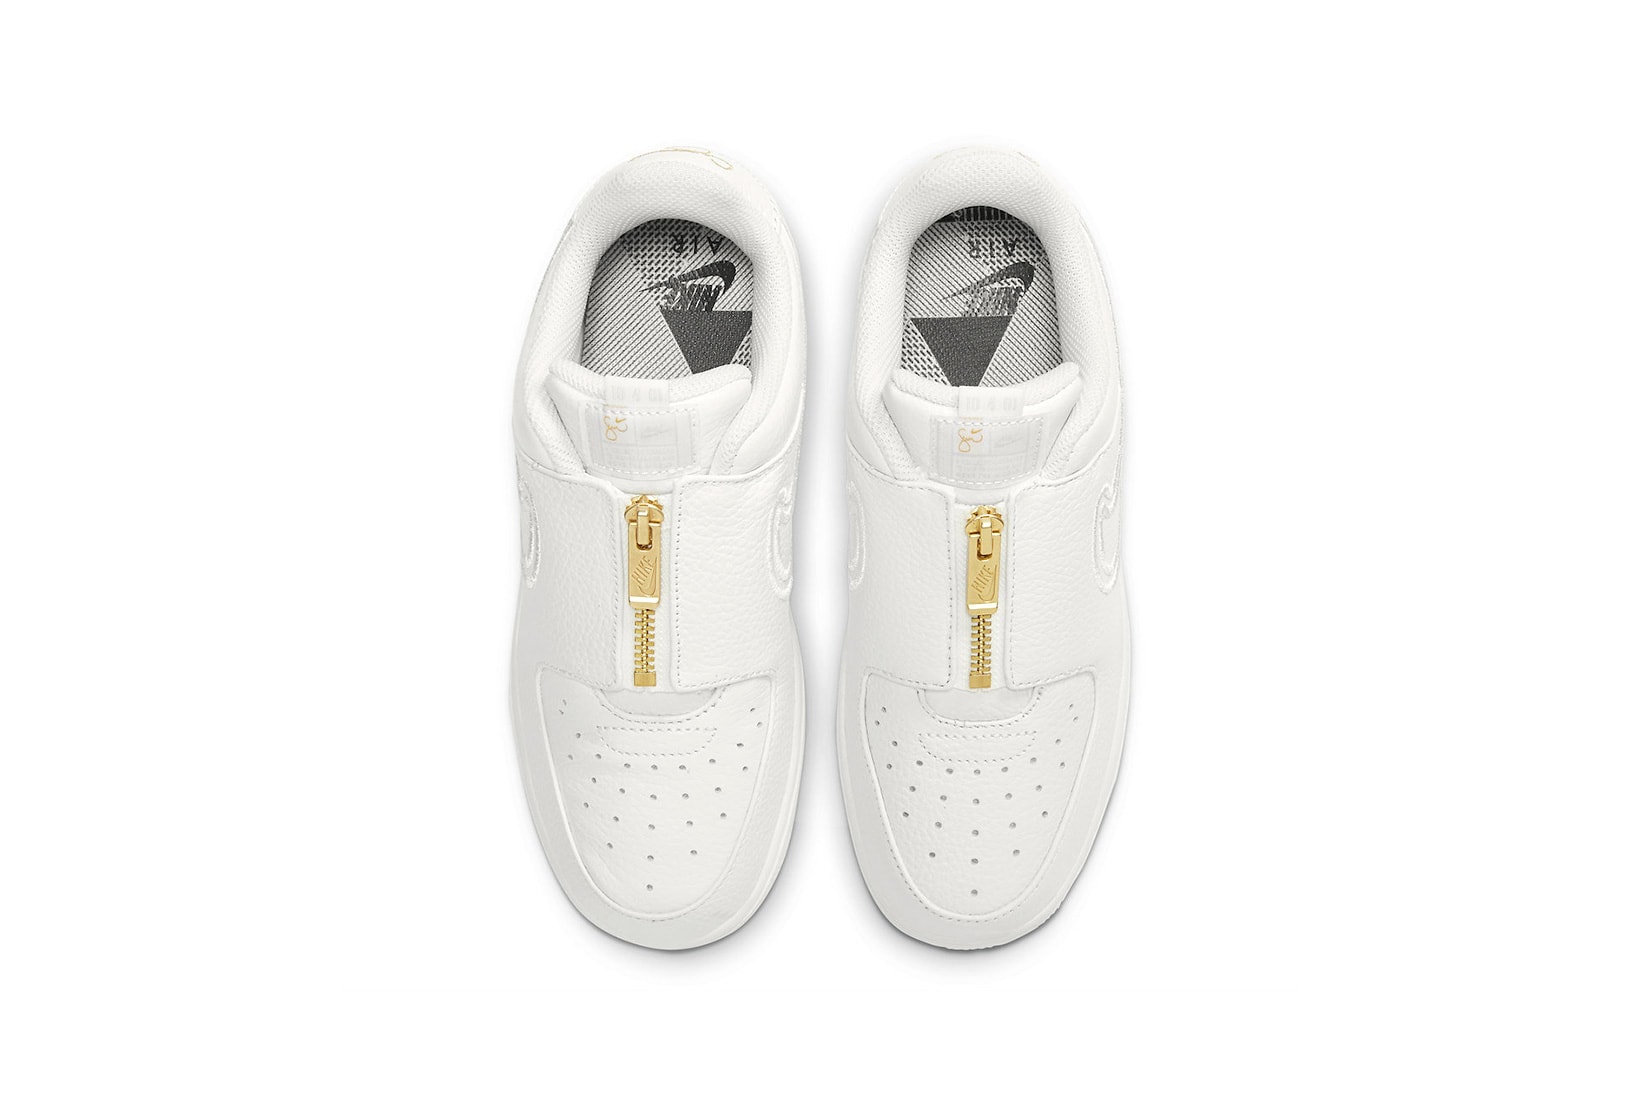 Serena Williams Nike Air Force 1 LXX Zip Sneakers Collaboration Footwear Kicks White Gold Top View Insole